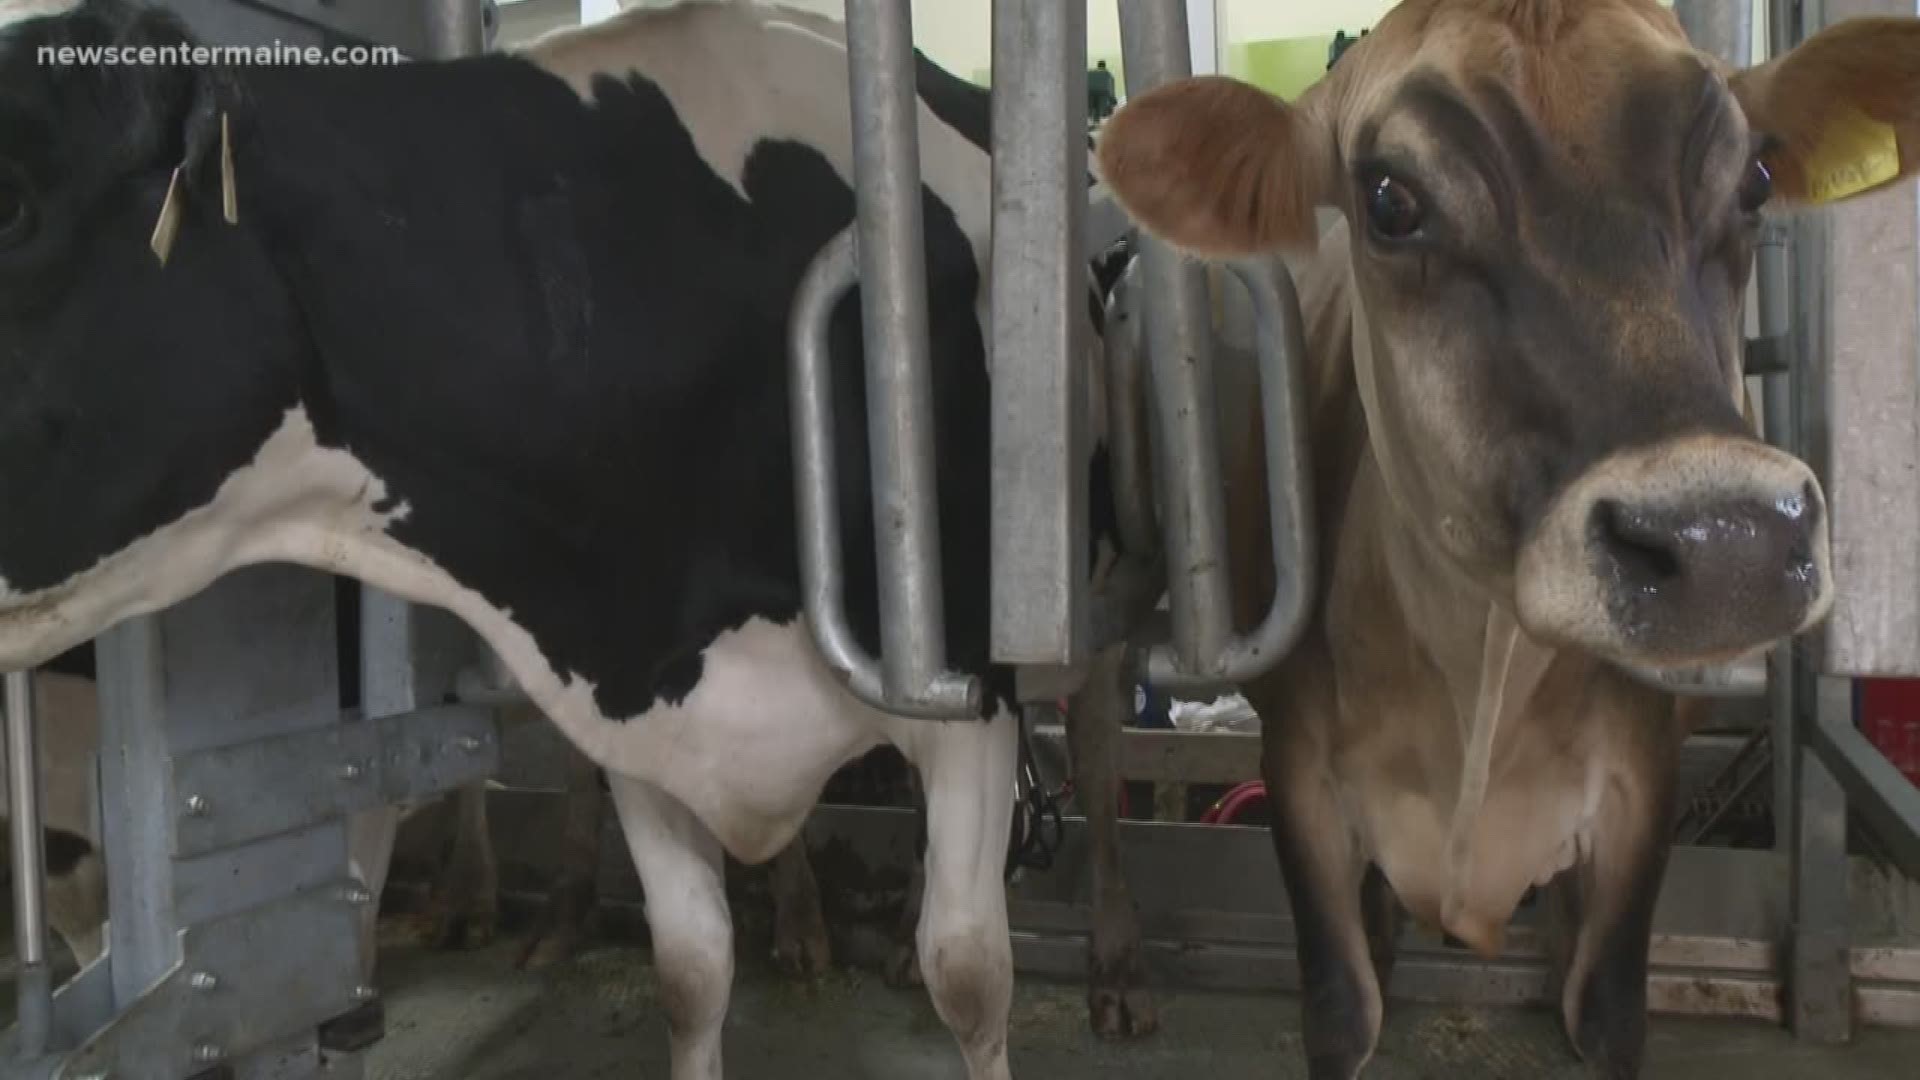 Organic dairy farmers can earn more for the milk